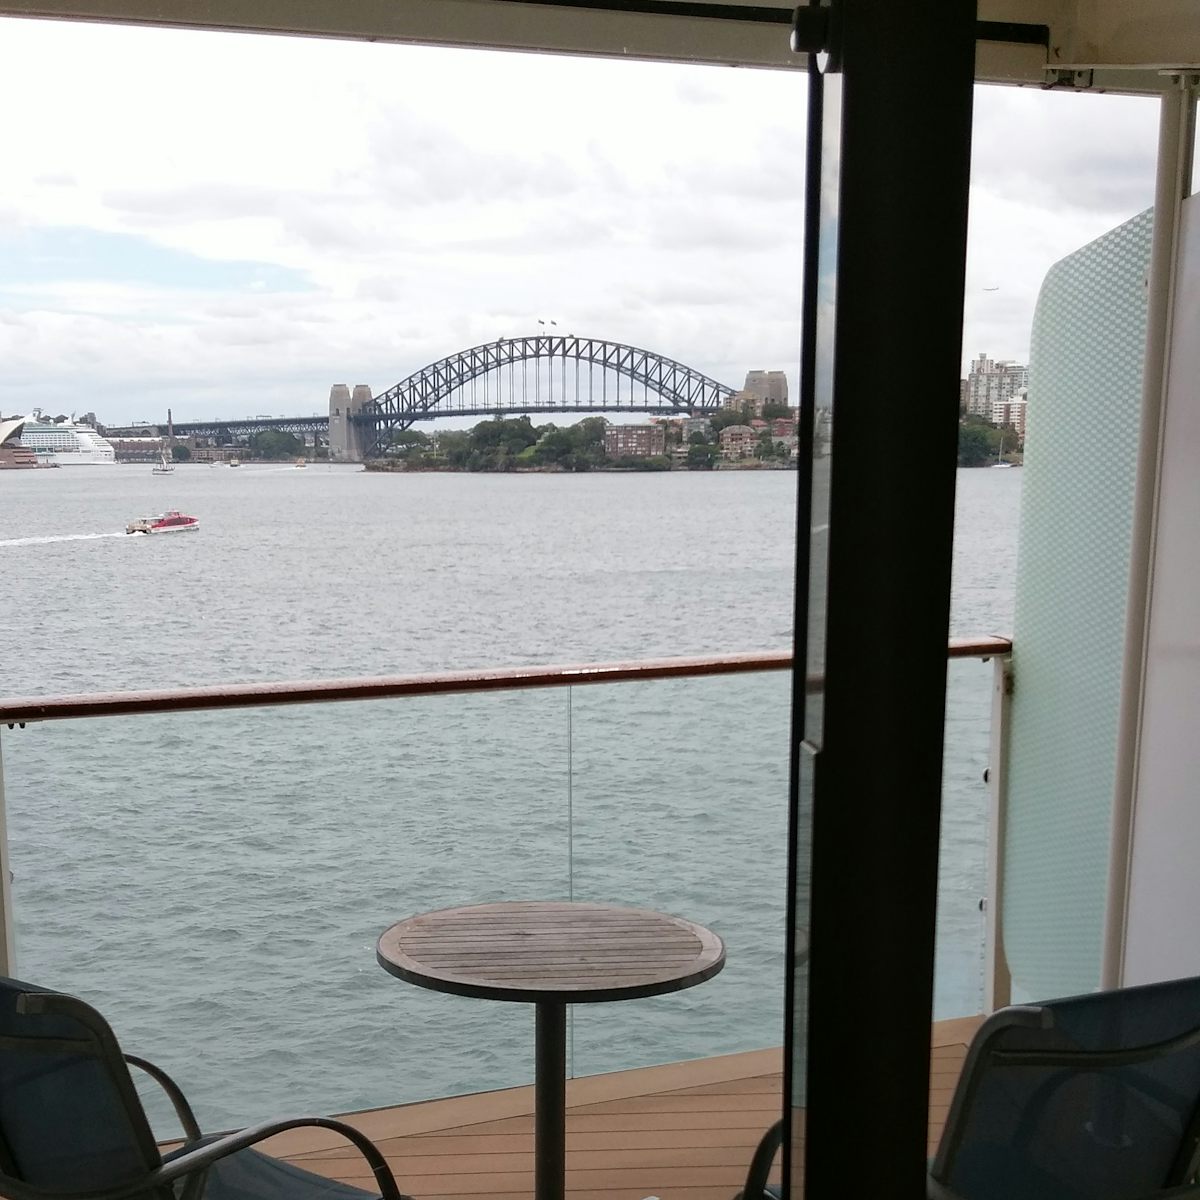 Sydney harbour bridge from our balcony stateroom.